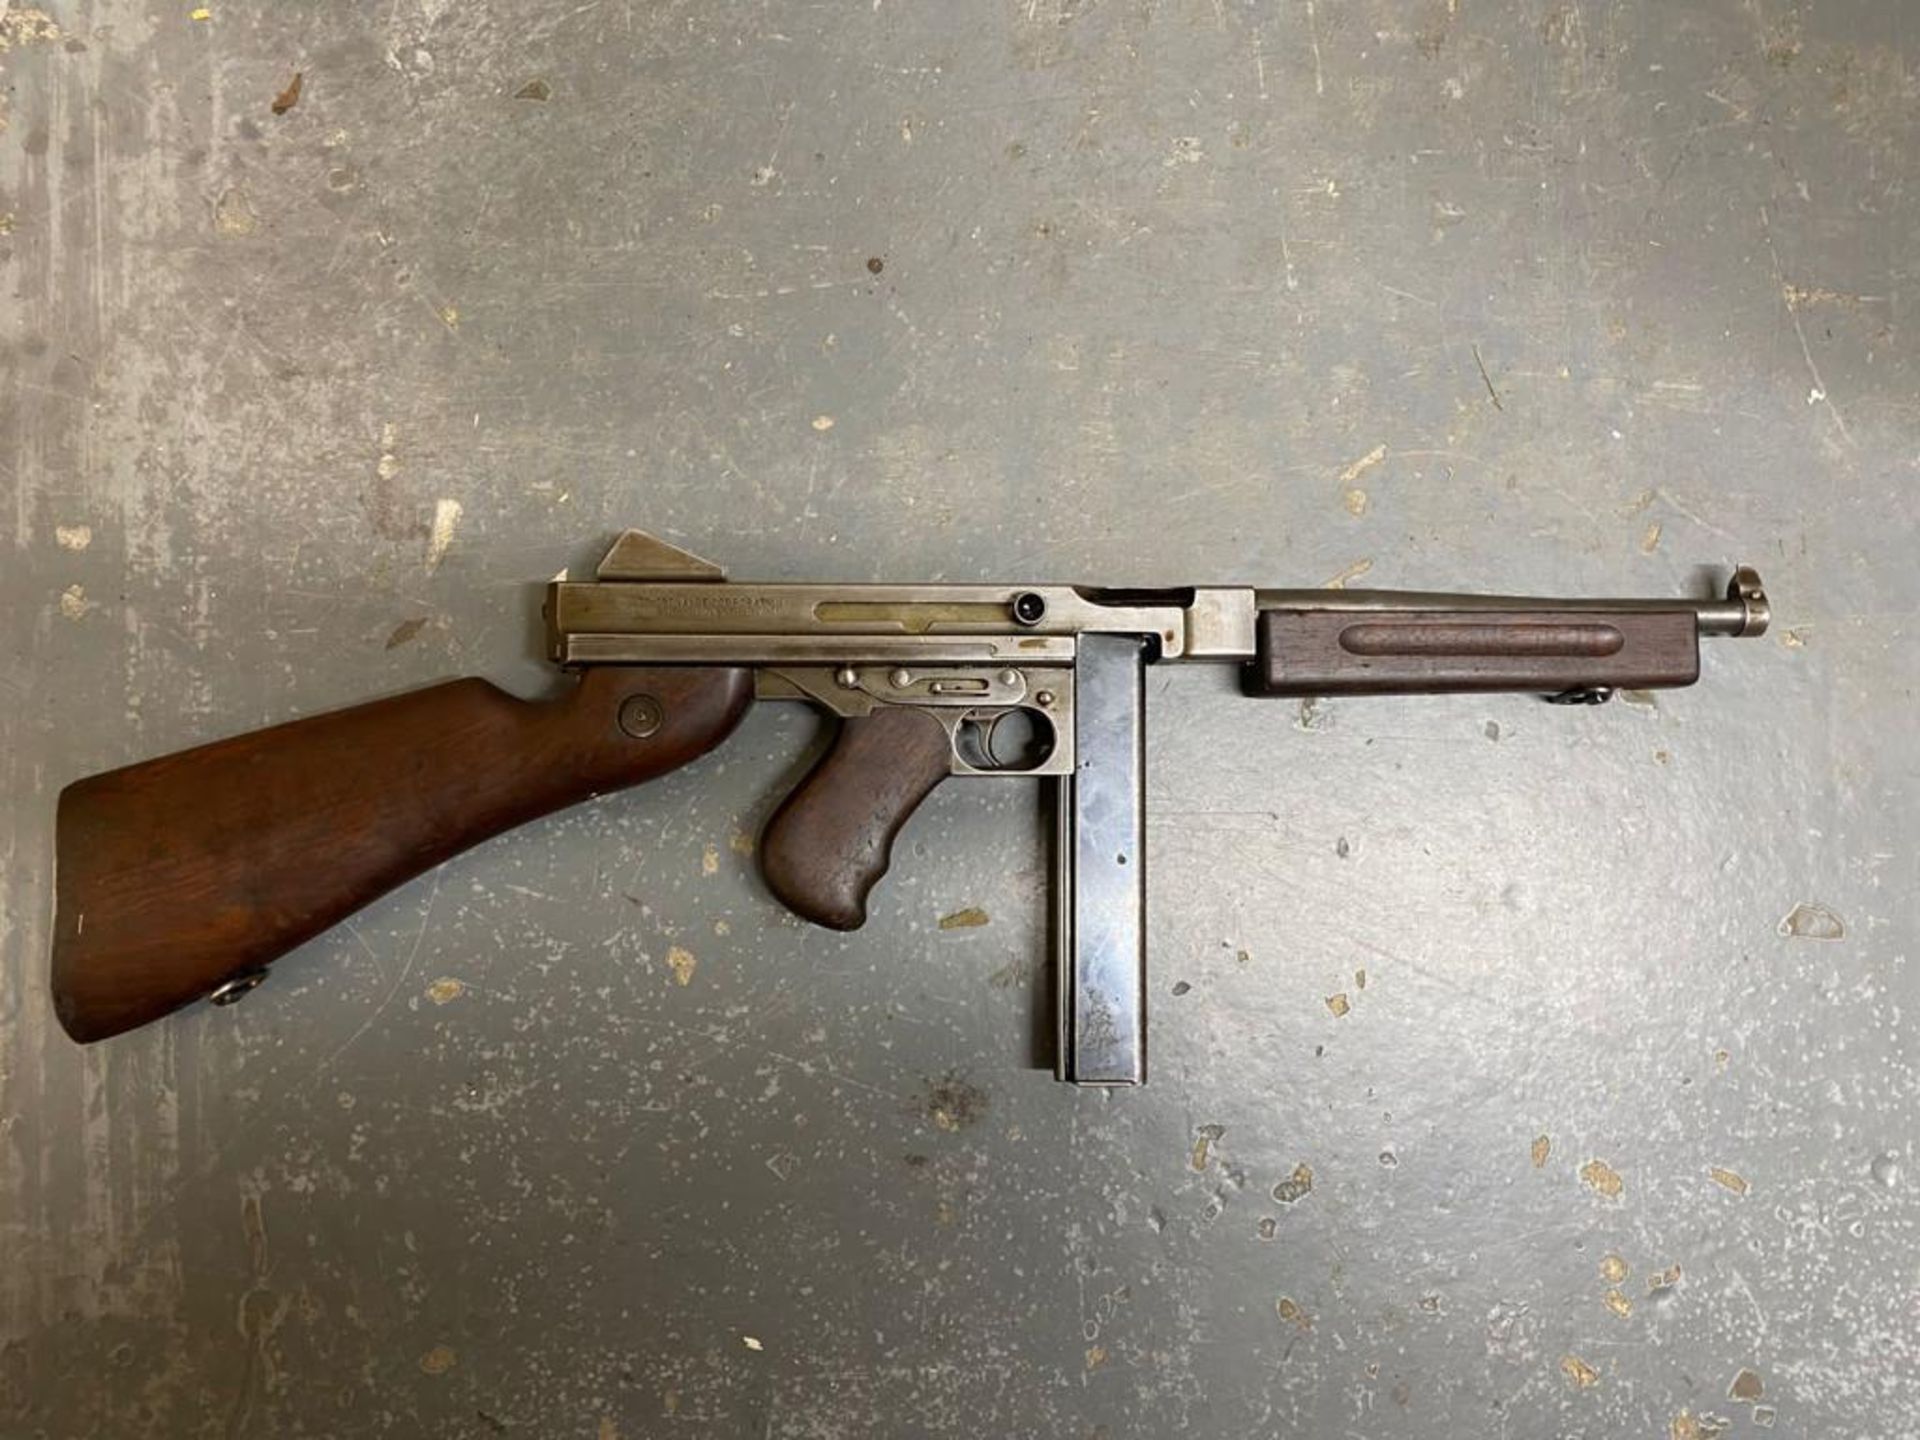 A Deactivated WW2 USA Thompson Sub Machine Gun - M1A1 Model. This 'Tommy gun' has a rear moving bolt - Image 7 of 11